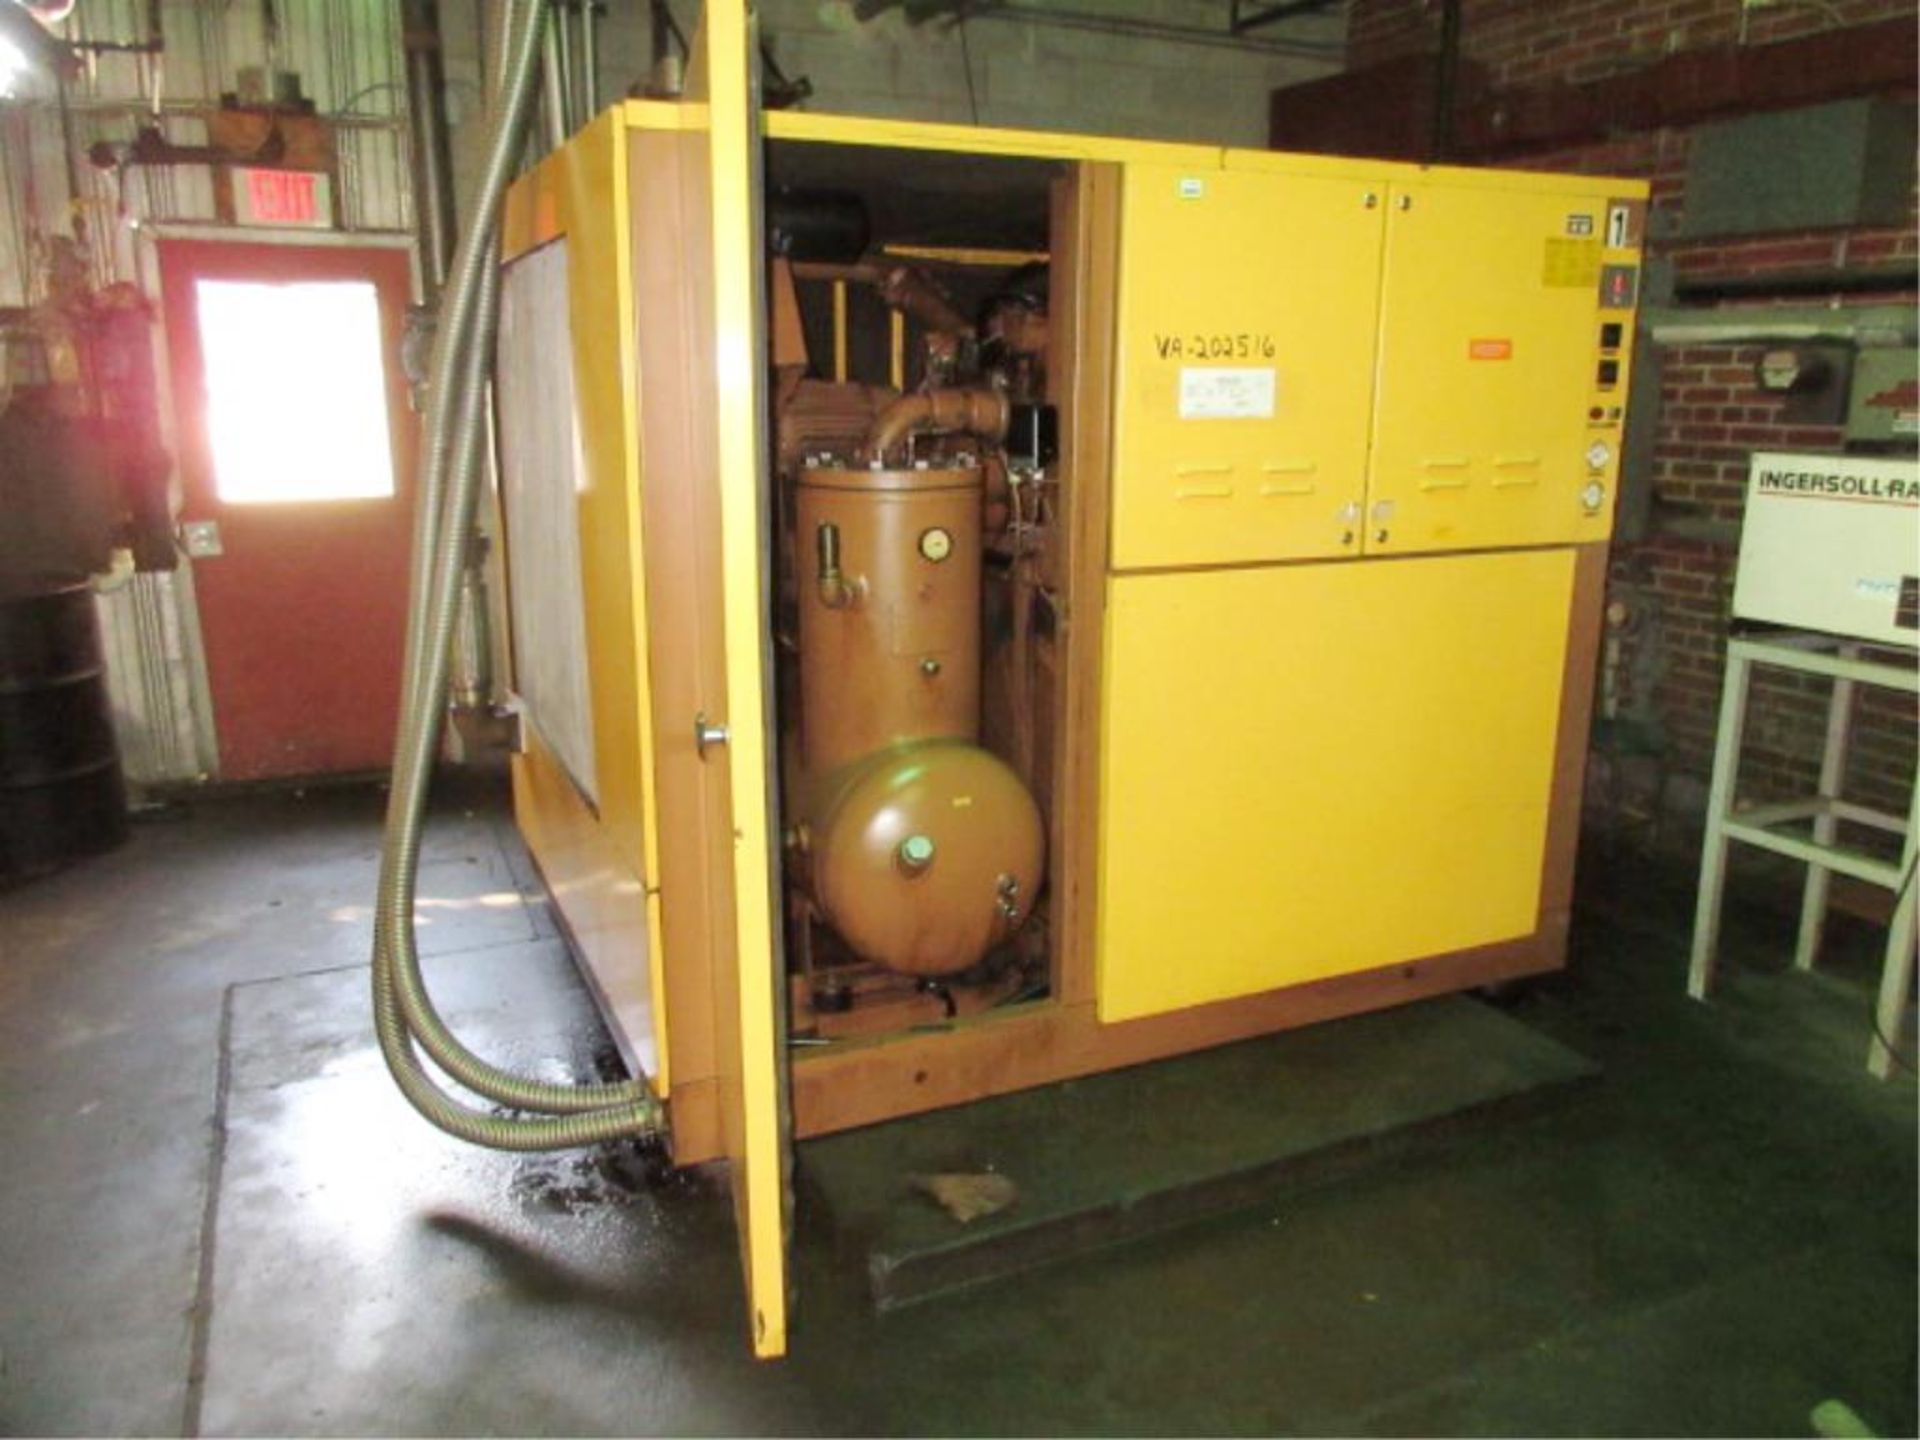 Kaeser ES 300 Sigma Profile Rotary Screw Air Compressor, (1987), 160 KW motor, service/load hrs. - Image 3 of 8